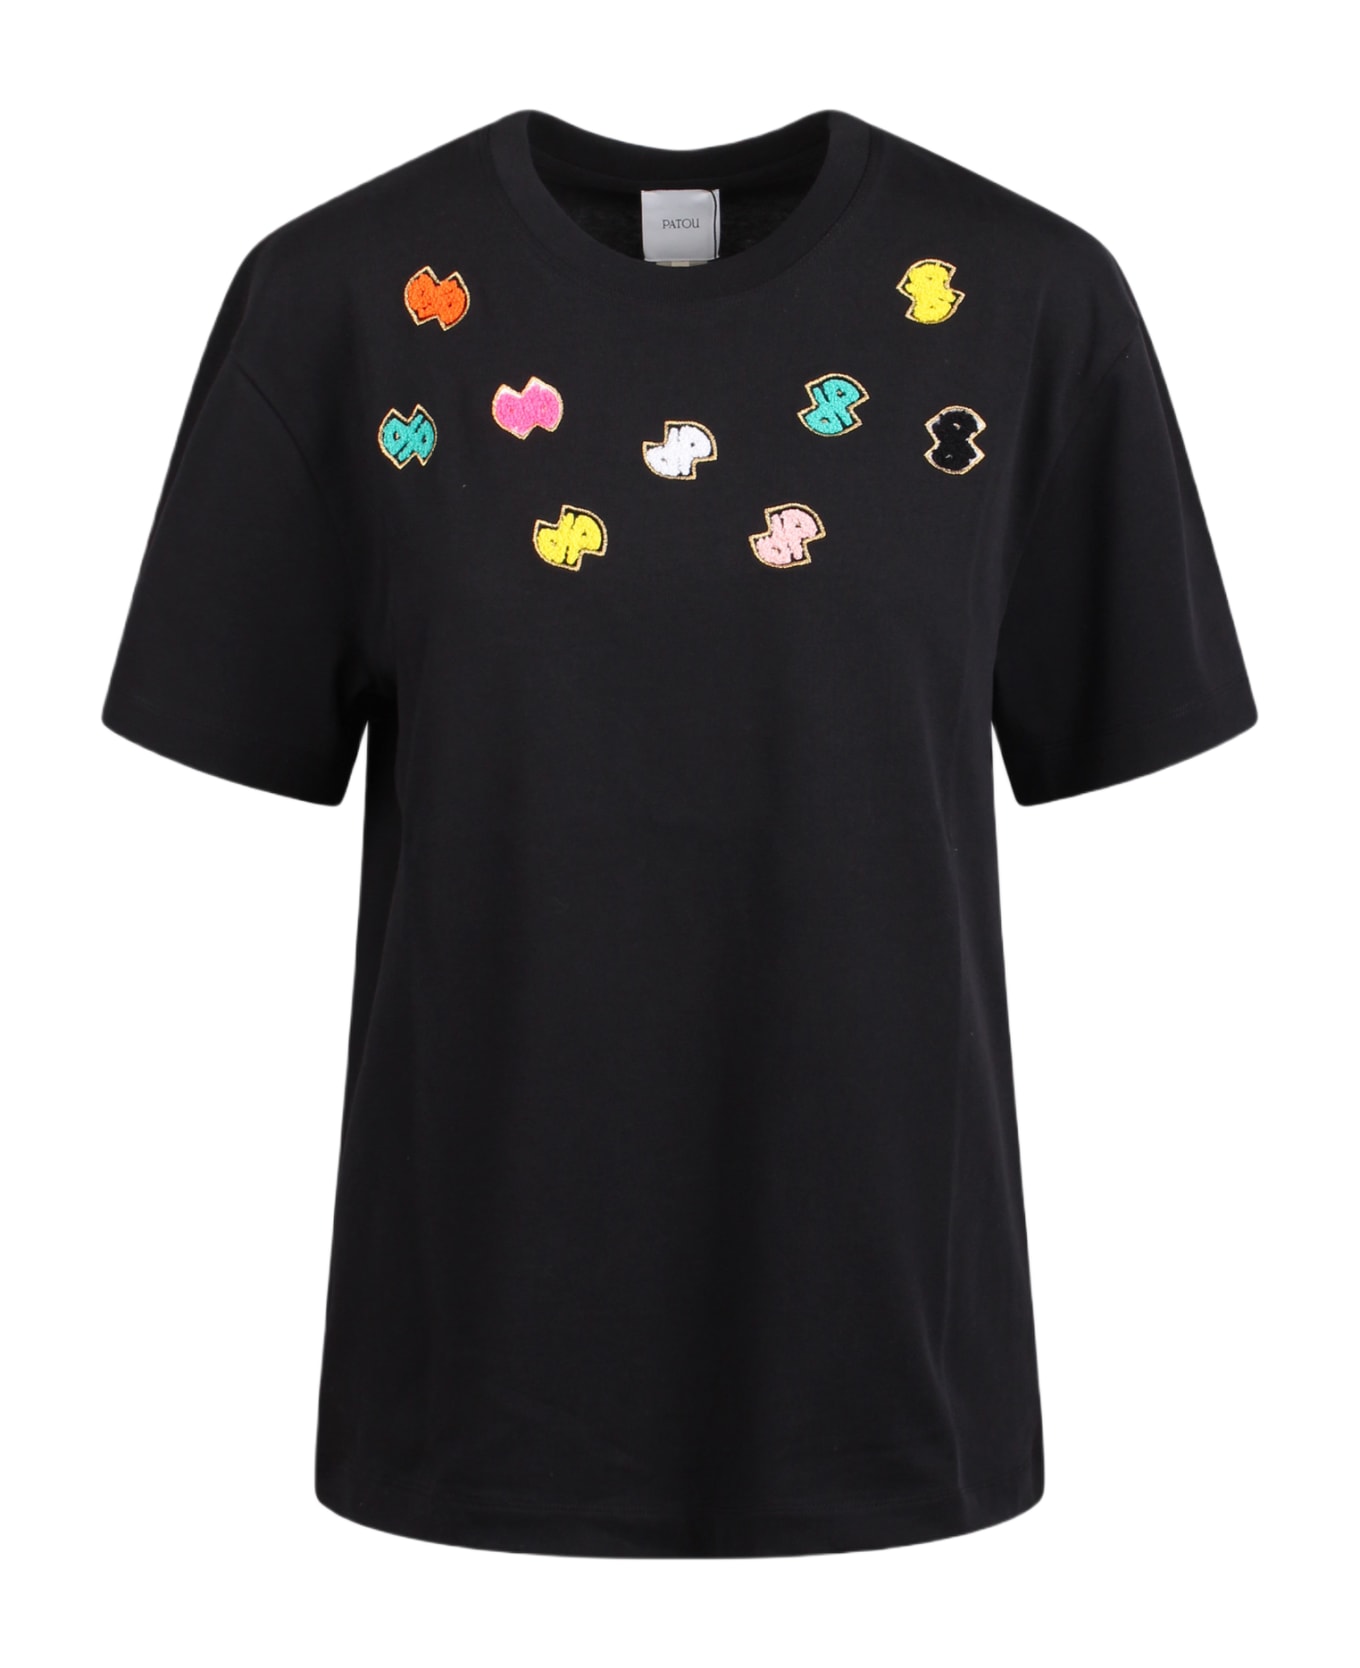 Patou Cotton T-shirt With Colorful Embroidered Logos